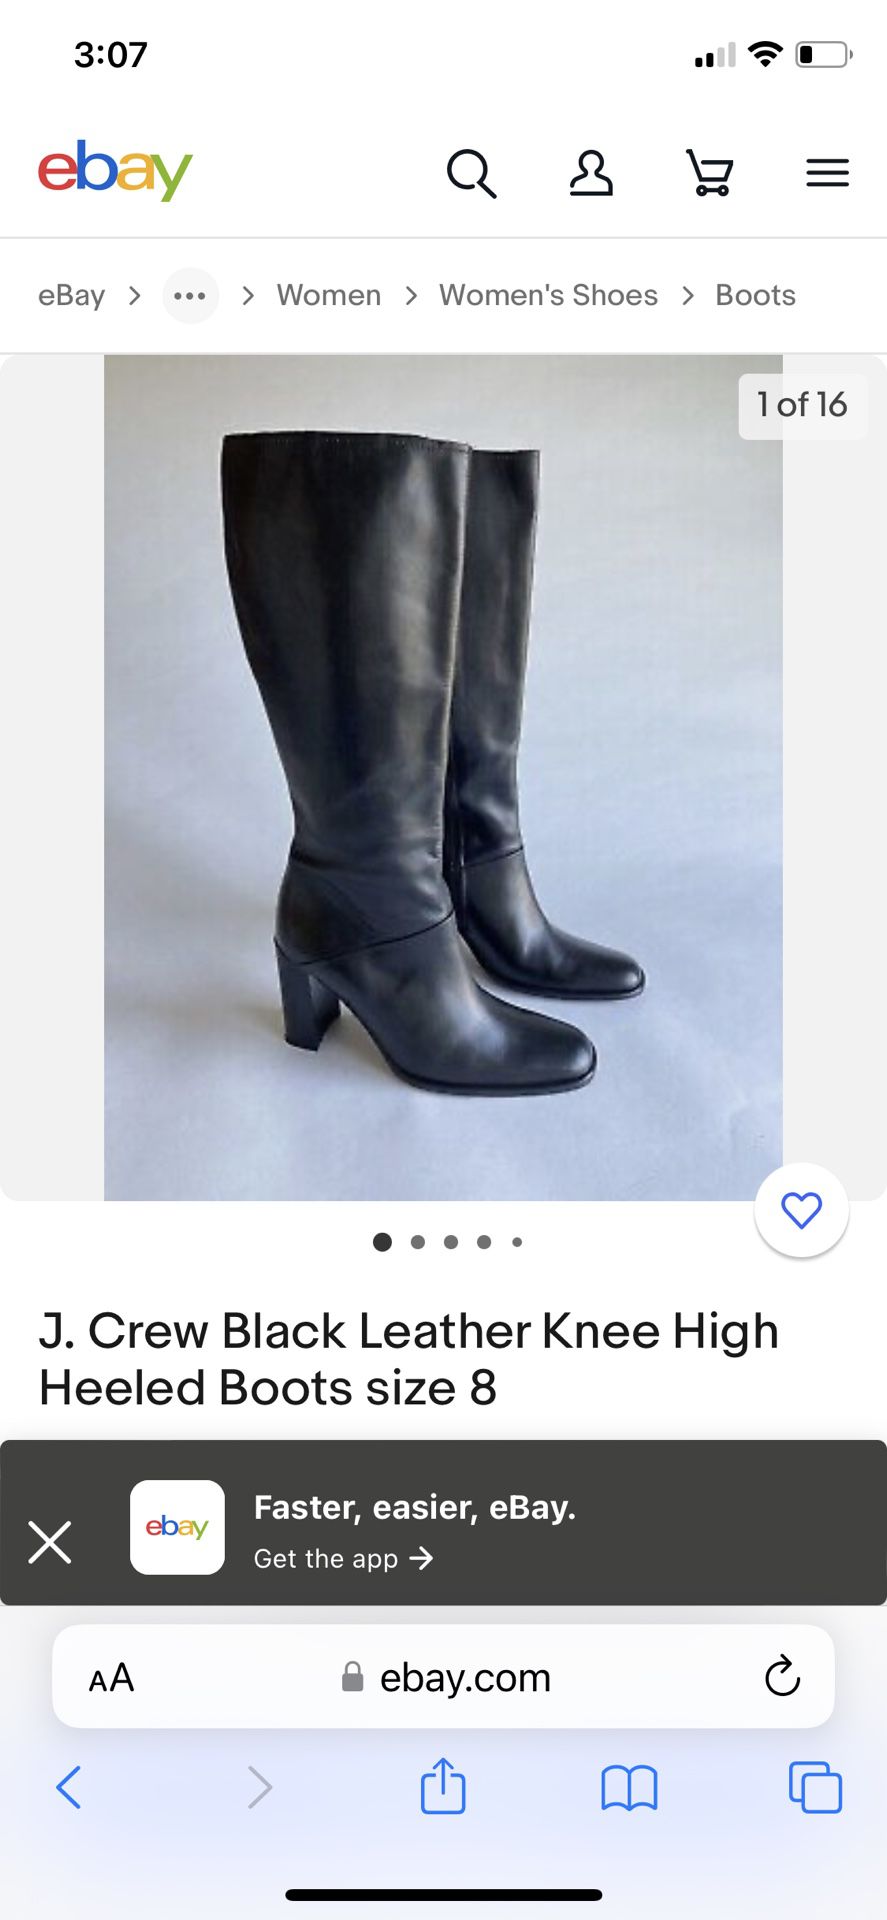 J.Crew Women’s Black Leather Knee High Heeled Riding Boots size 7.5